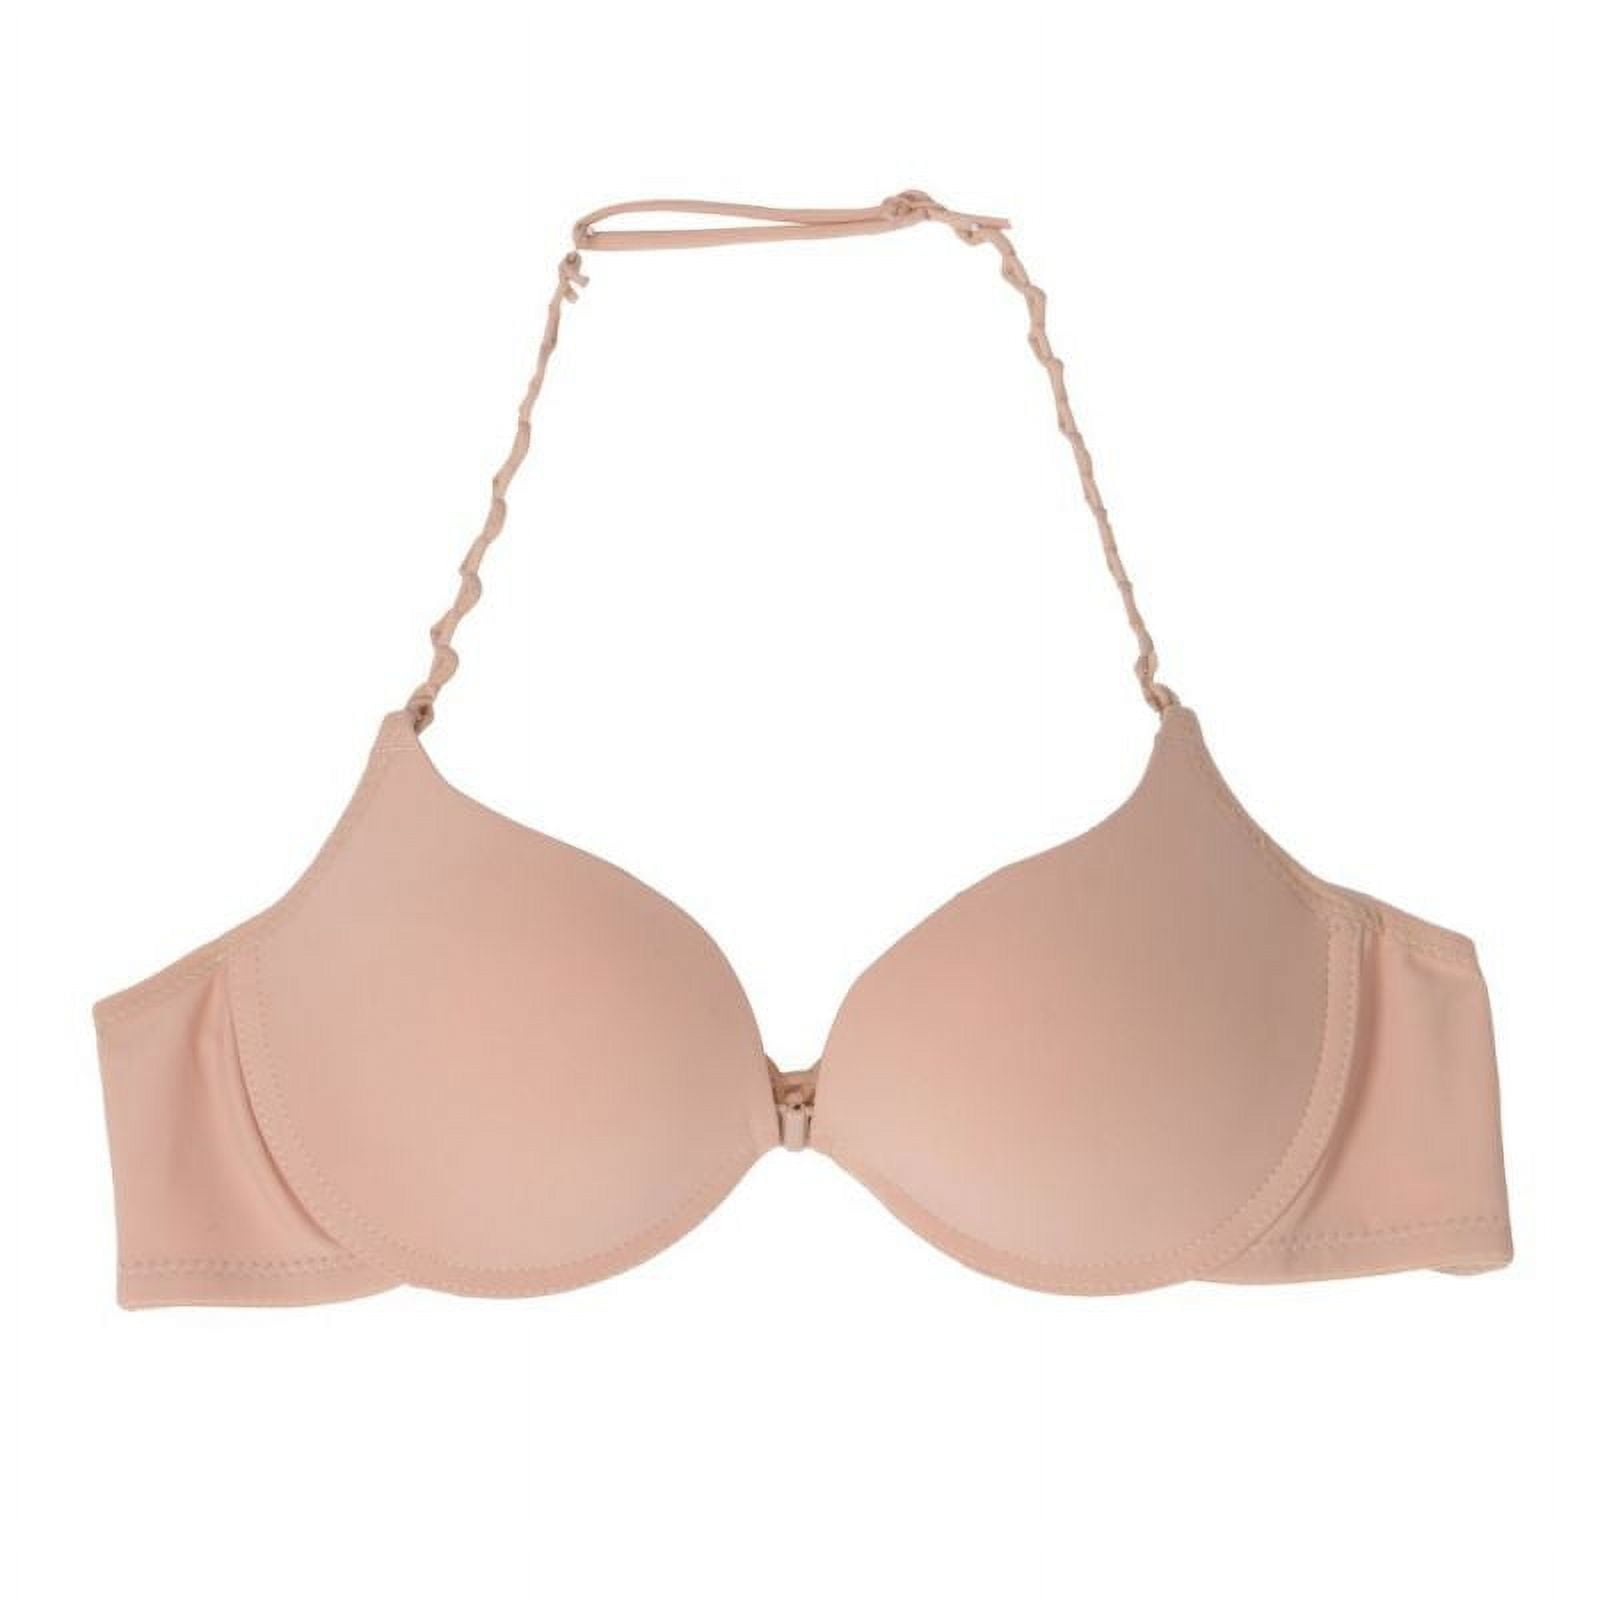 Fashion Deep Cup Bra, Plus Size Front Buckle Push Up Wireless Bra Women  Full Coverage Seamless Bras (Color : K, Size : 46/105)